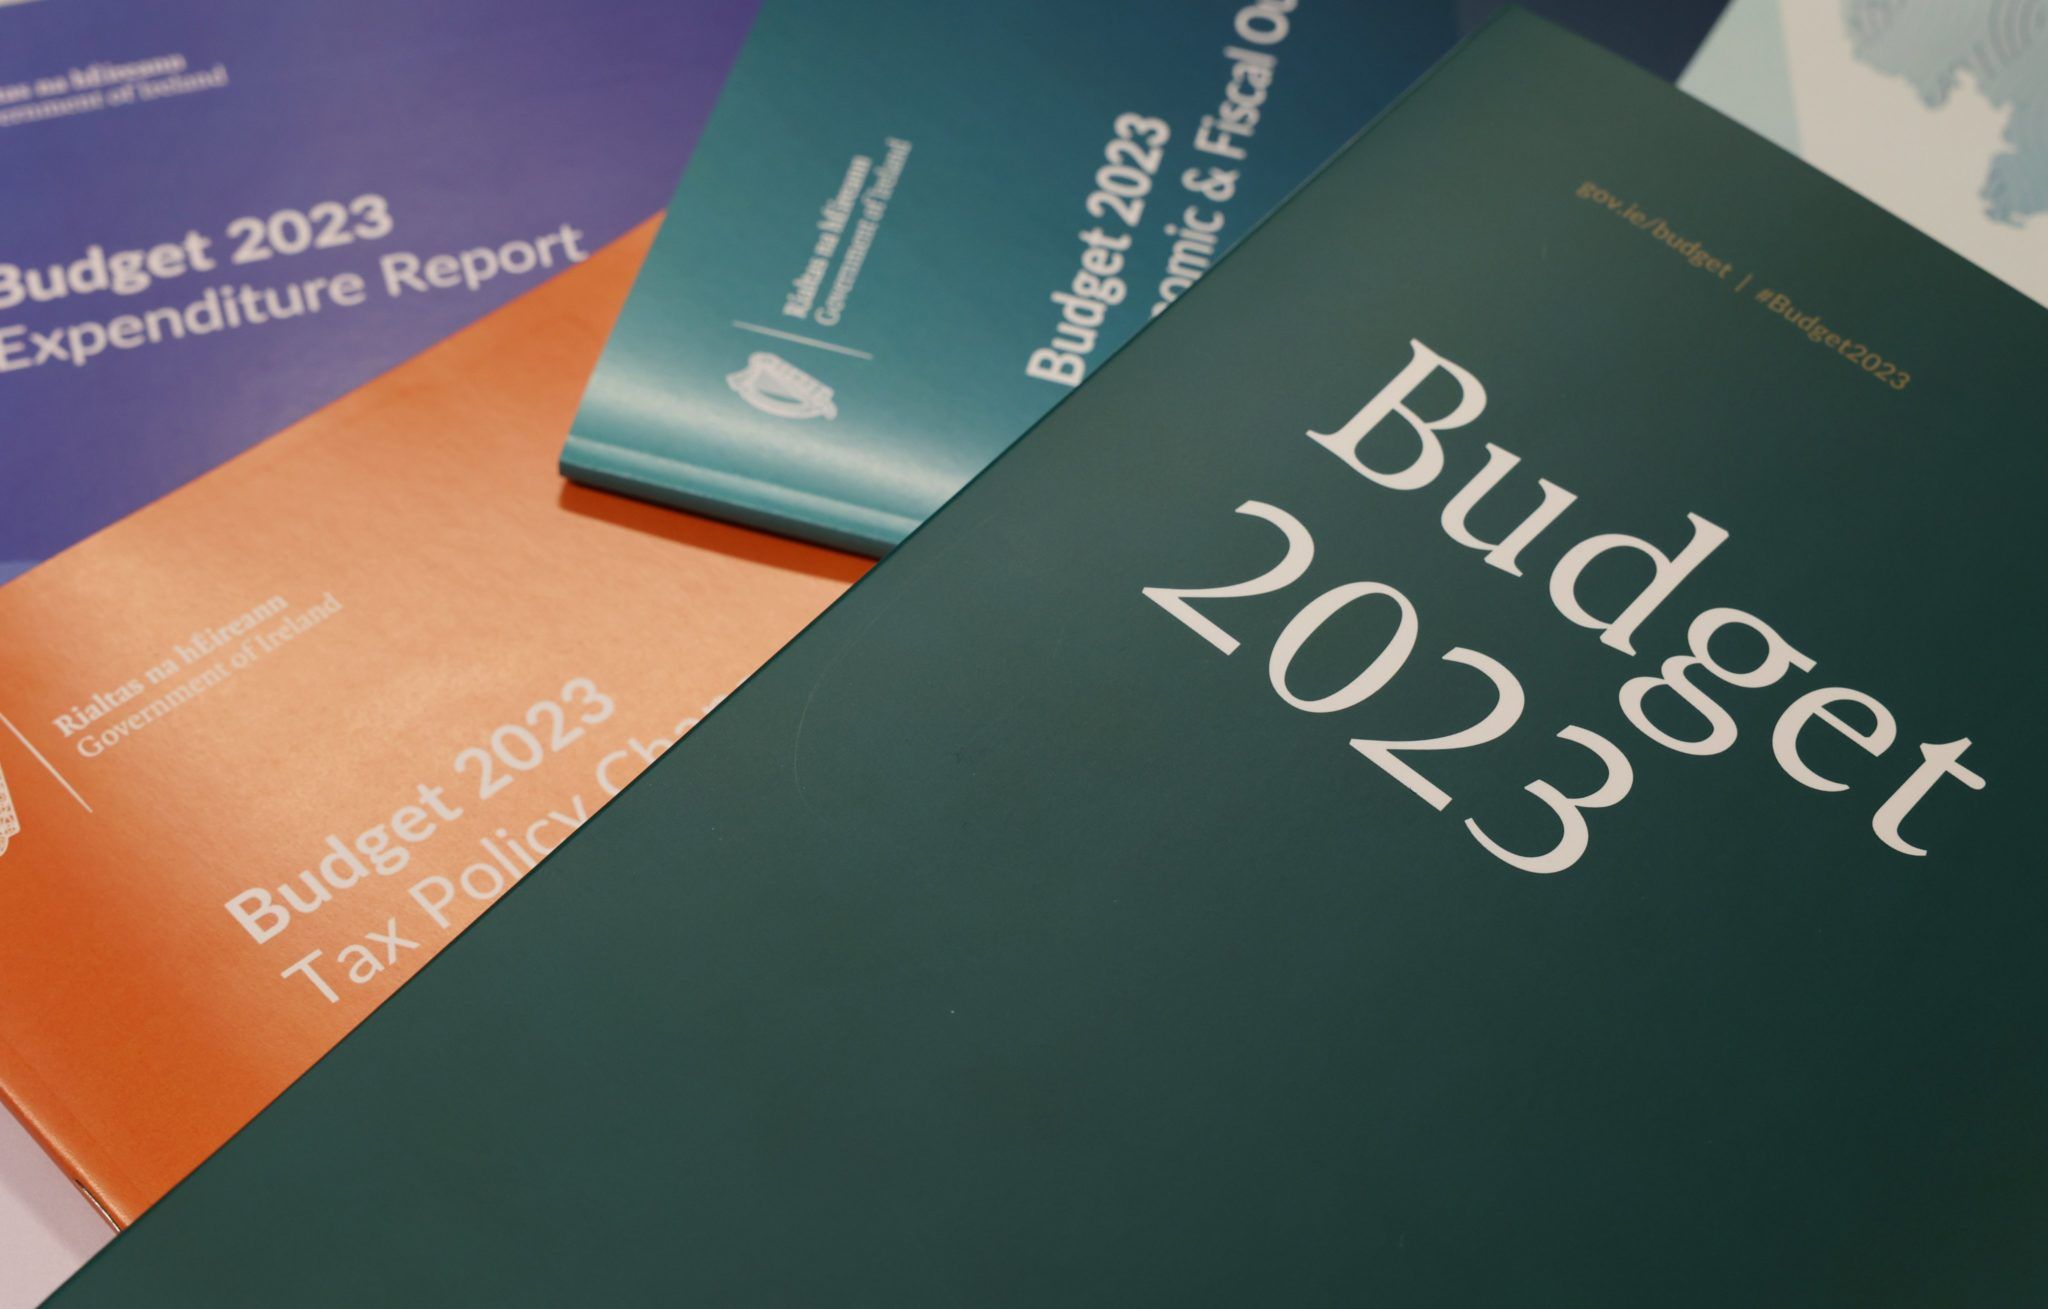 Budget 2023: Rent credit, vacant homes tax and social welfare increases